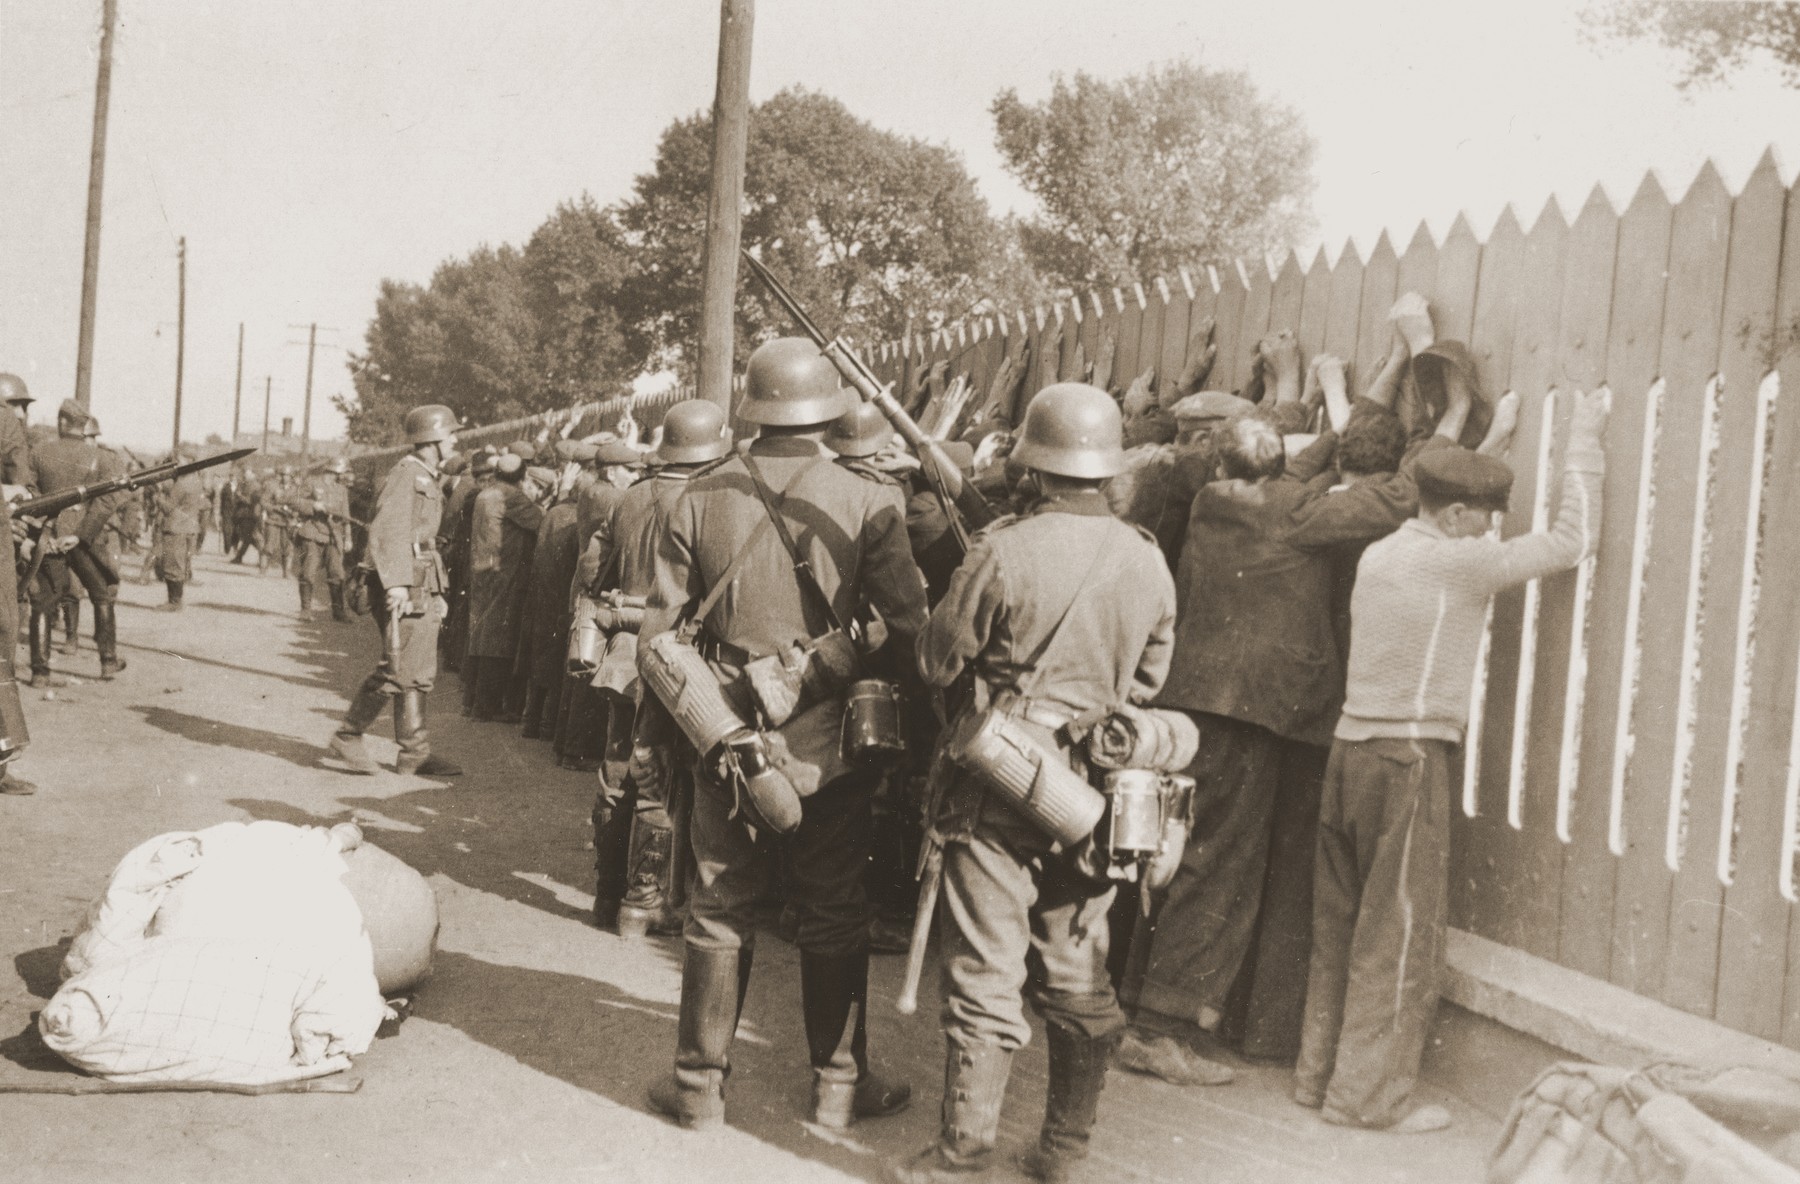 German soldiers round-up a group of Jewish men and line them up against a picket fence in Czestochowa.

One photograph from an album belonging to a member of a Wehrmacht machine gunners' unit, which was found after the war by Lorenzo Hawkins (the donor's grandfather), an American serviceman in Company B, 56th Armored Engineer Battalion.